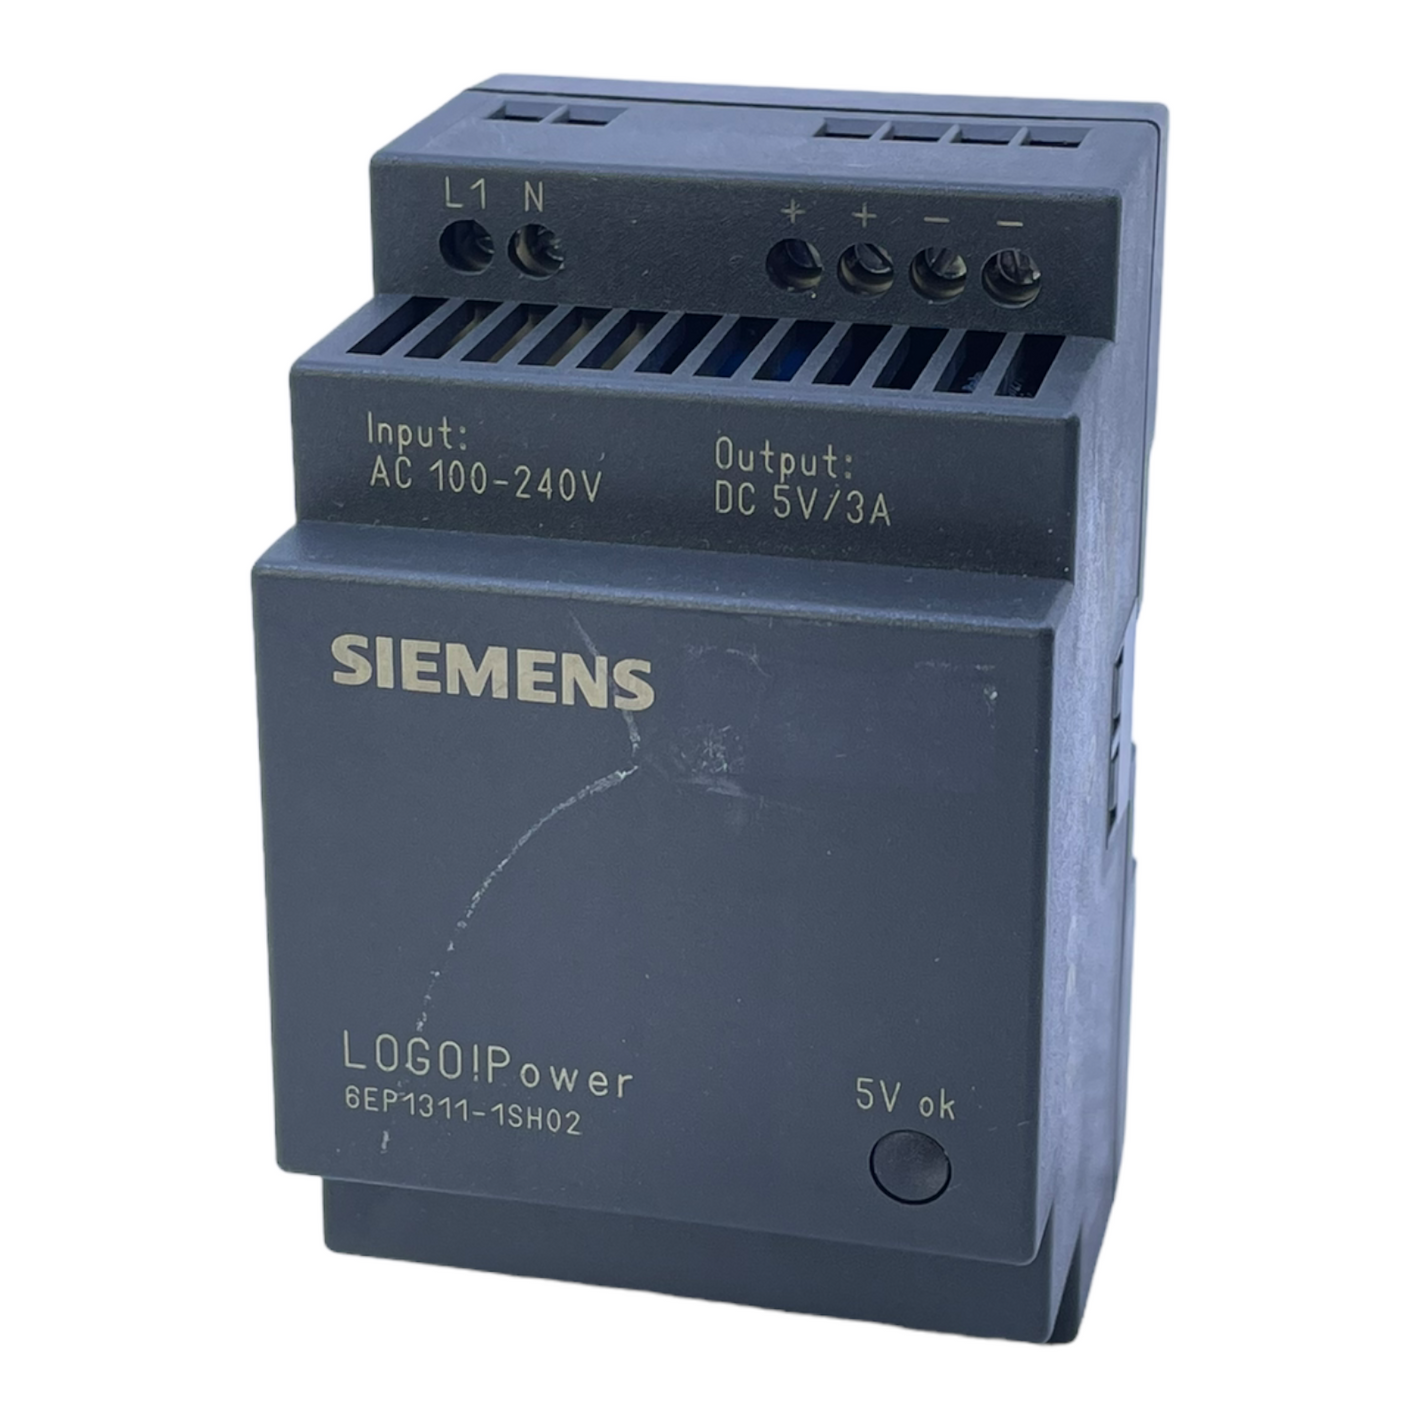 Siemens 6EP1311-1SH02 power supply for industrial use 100-240V AC 50/60Hz